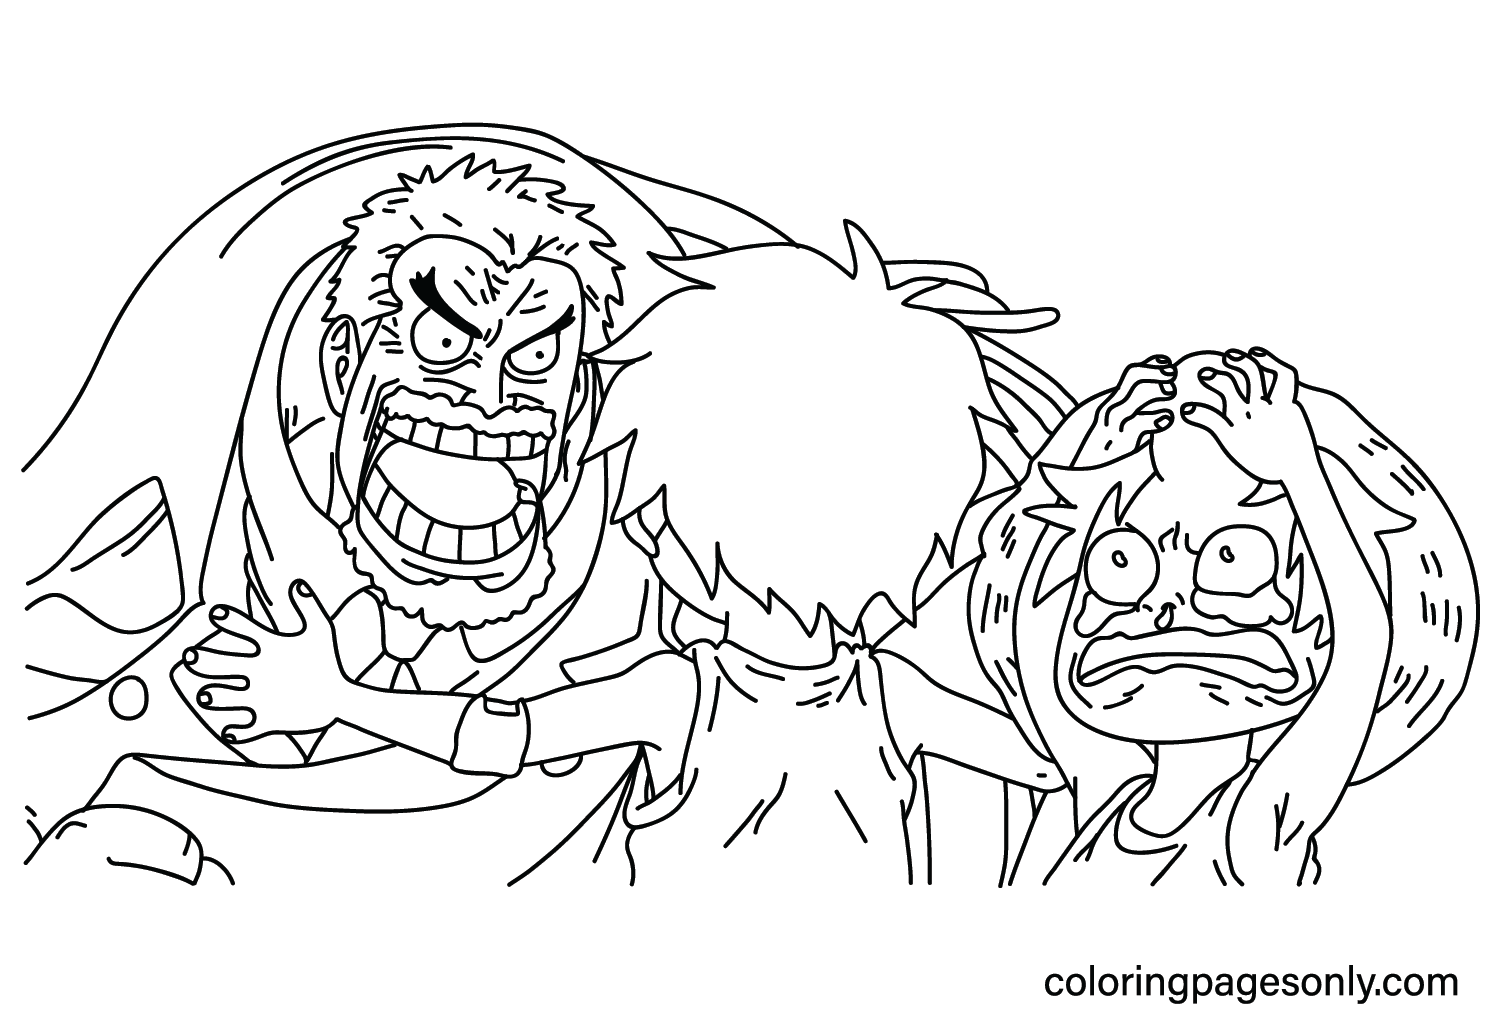 Monkey D. Garp, Ace, Luffy Coloring Page from Luffy